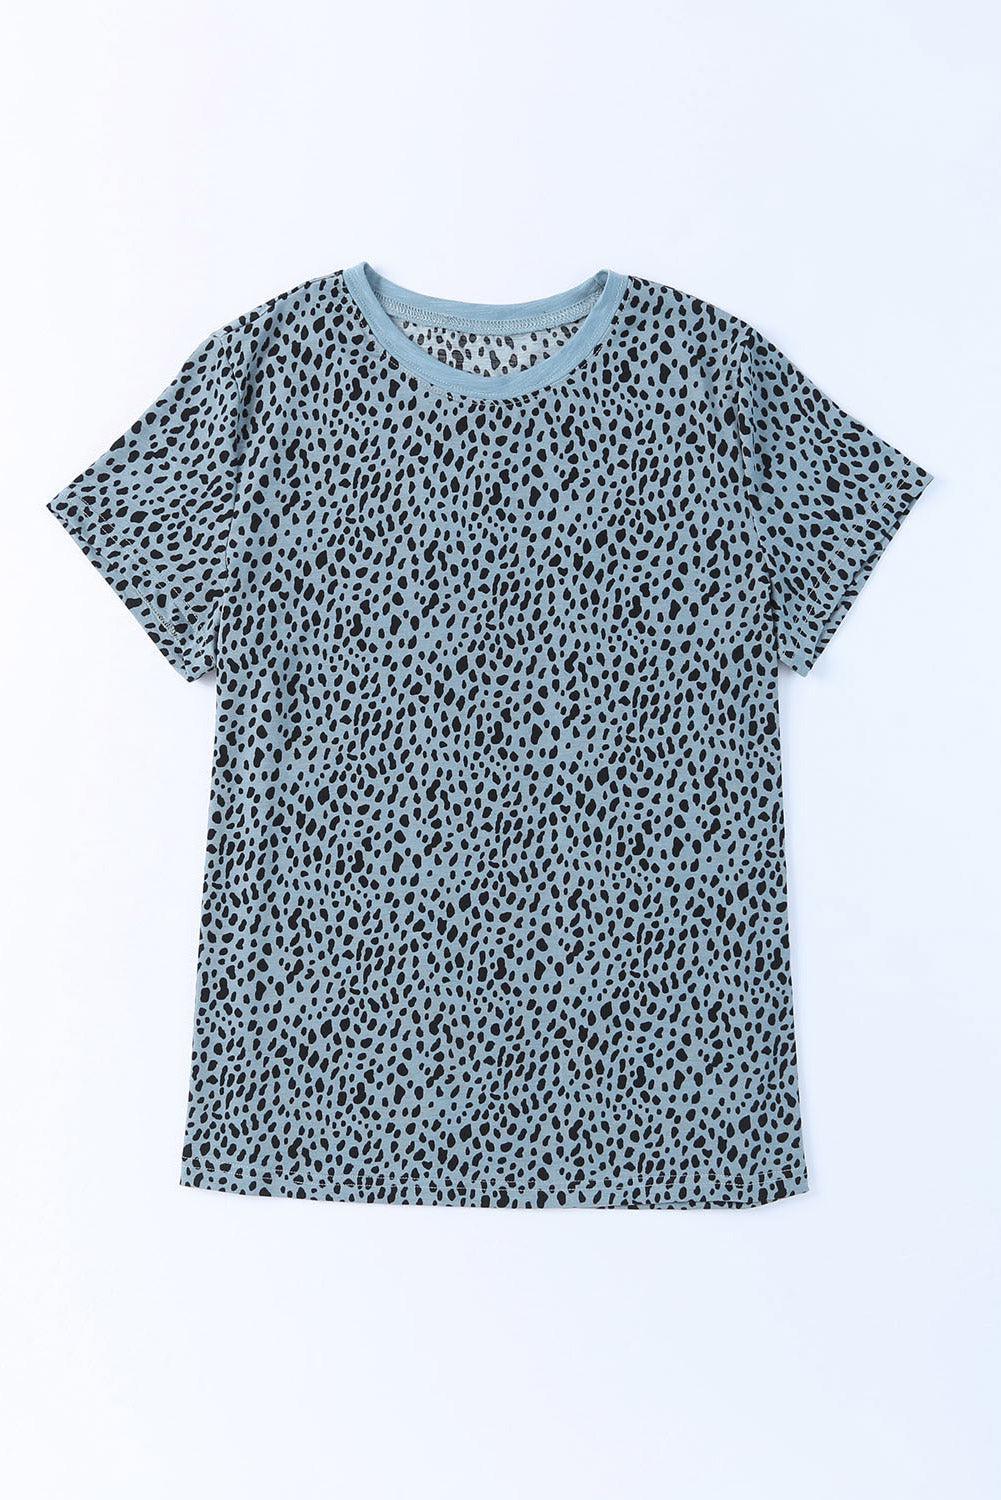 a t - shirt with a blue and black animal print